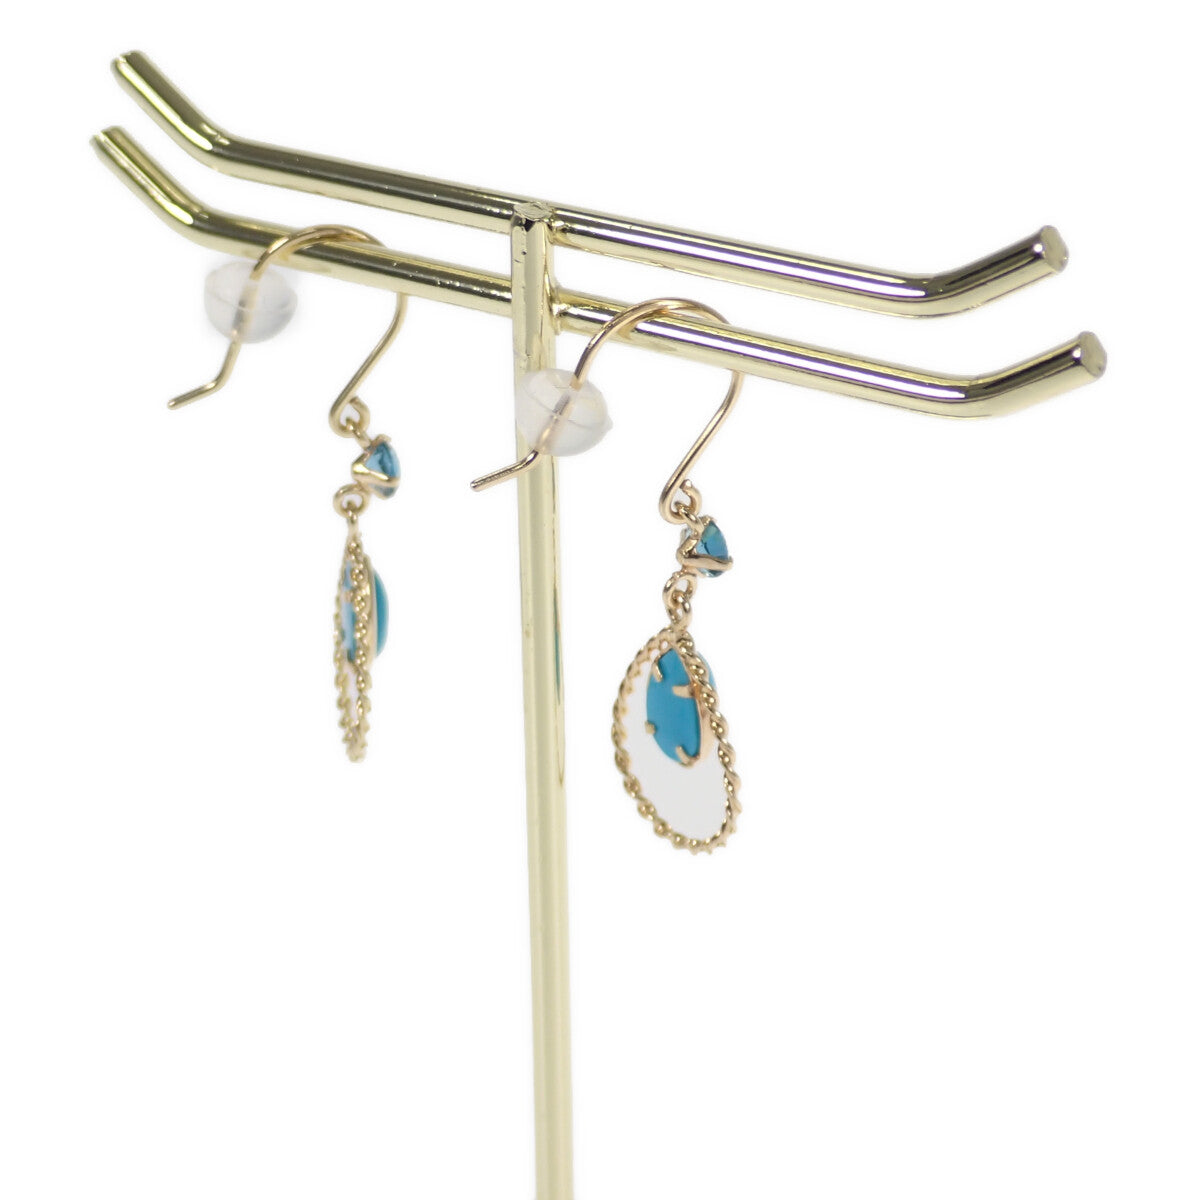 [LuxUness]  Women's 0.14ct Turquoise Drop Design Earrings in K18 Yellow Gold, Gold, Never Used, Pre-owned in Brand new